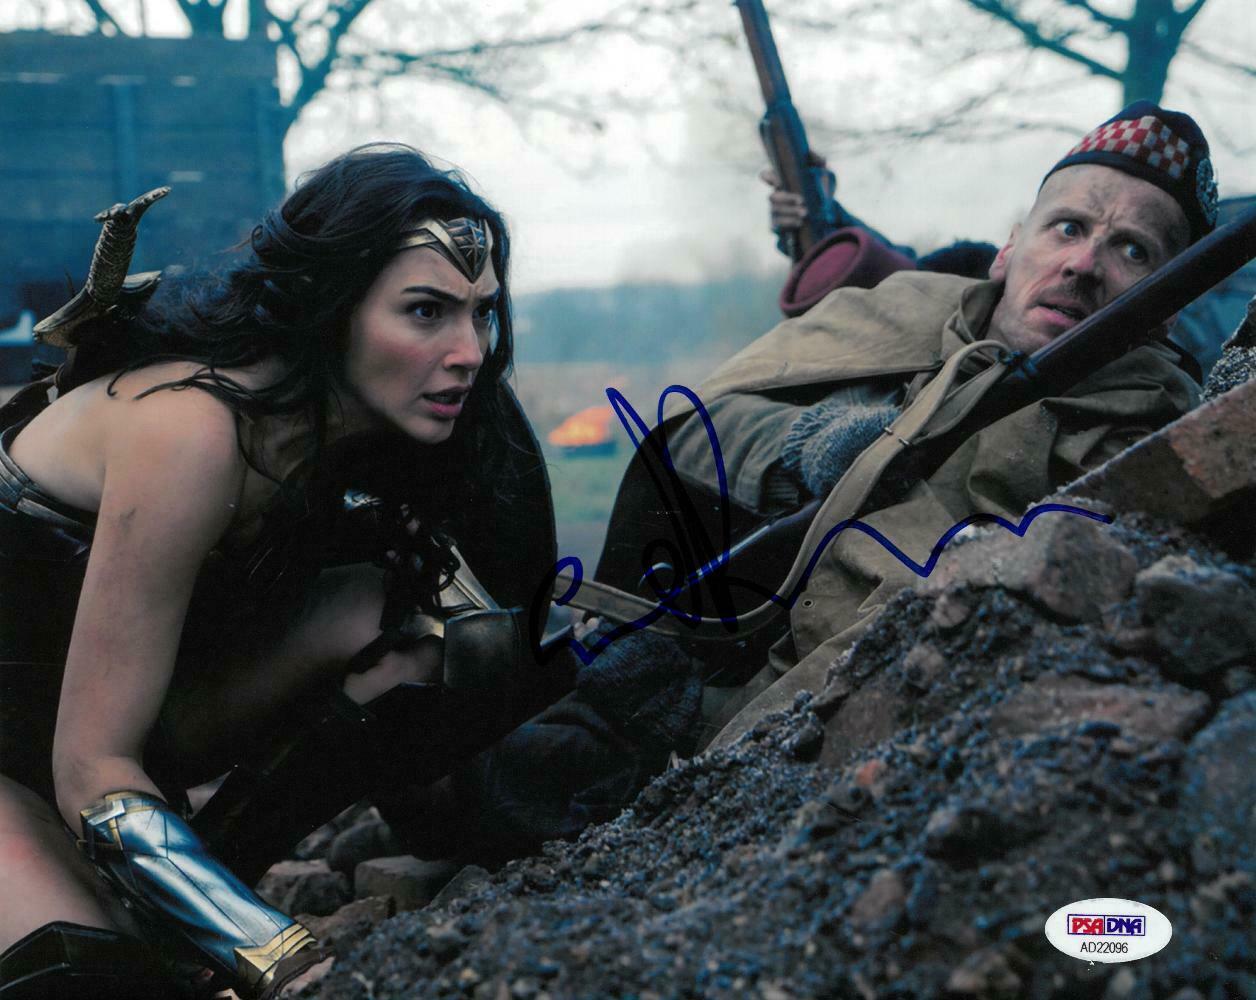 Ewen Bremner Signed Wonder Woman Autographed 8x10 Photo Poster painting PSA/DNA #AD22096